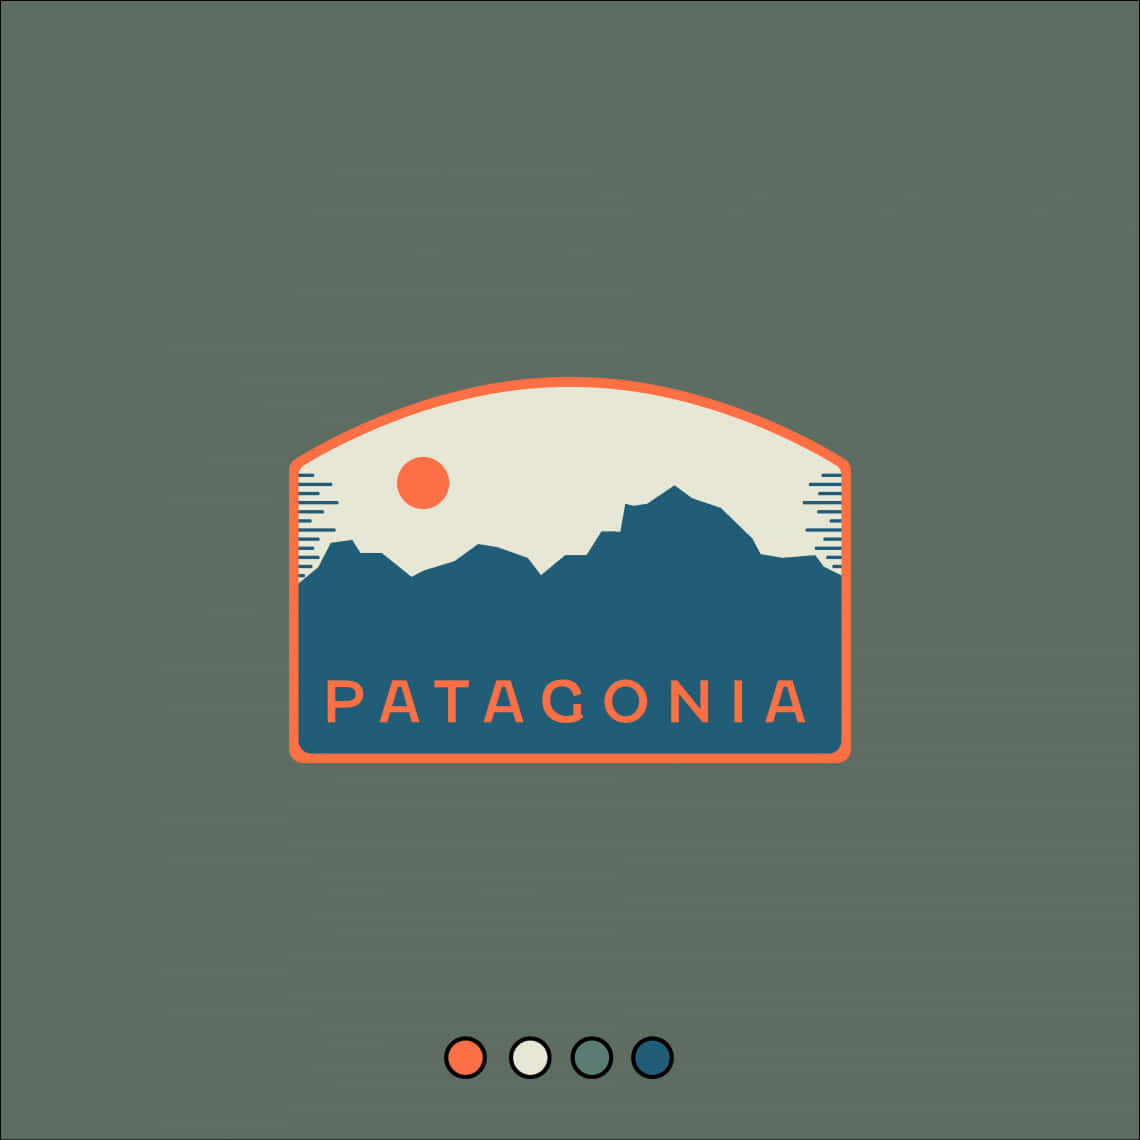 Download Patagonia Logo Background | Wallpapers.com